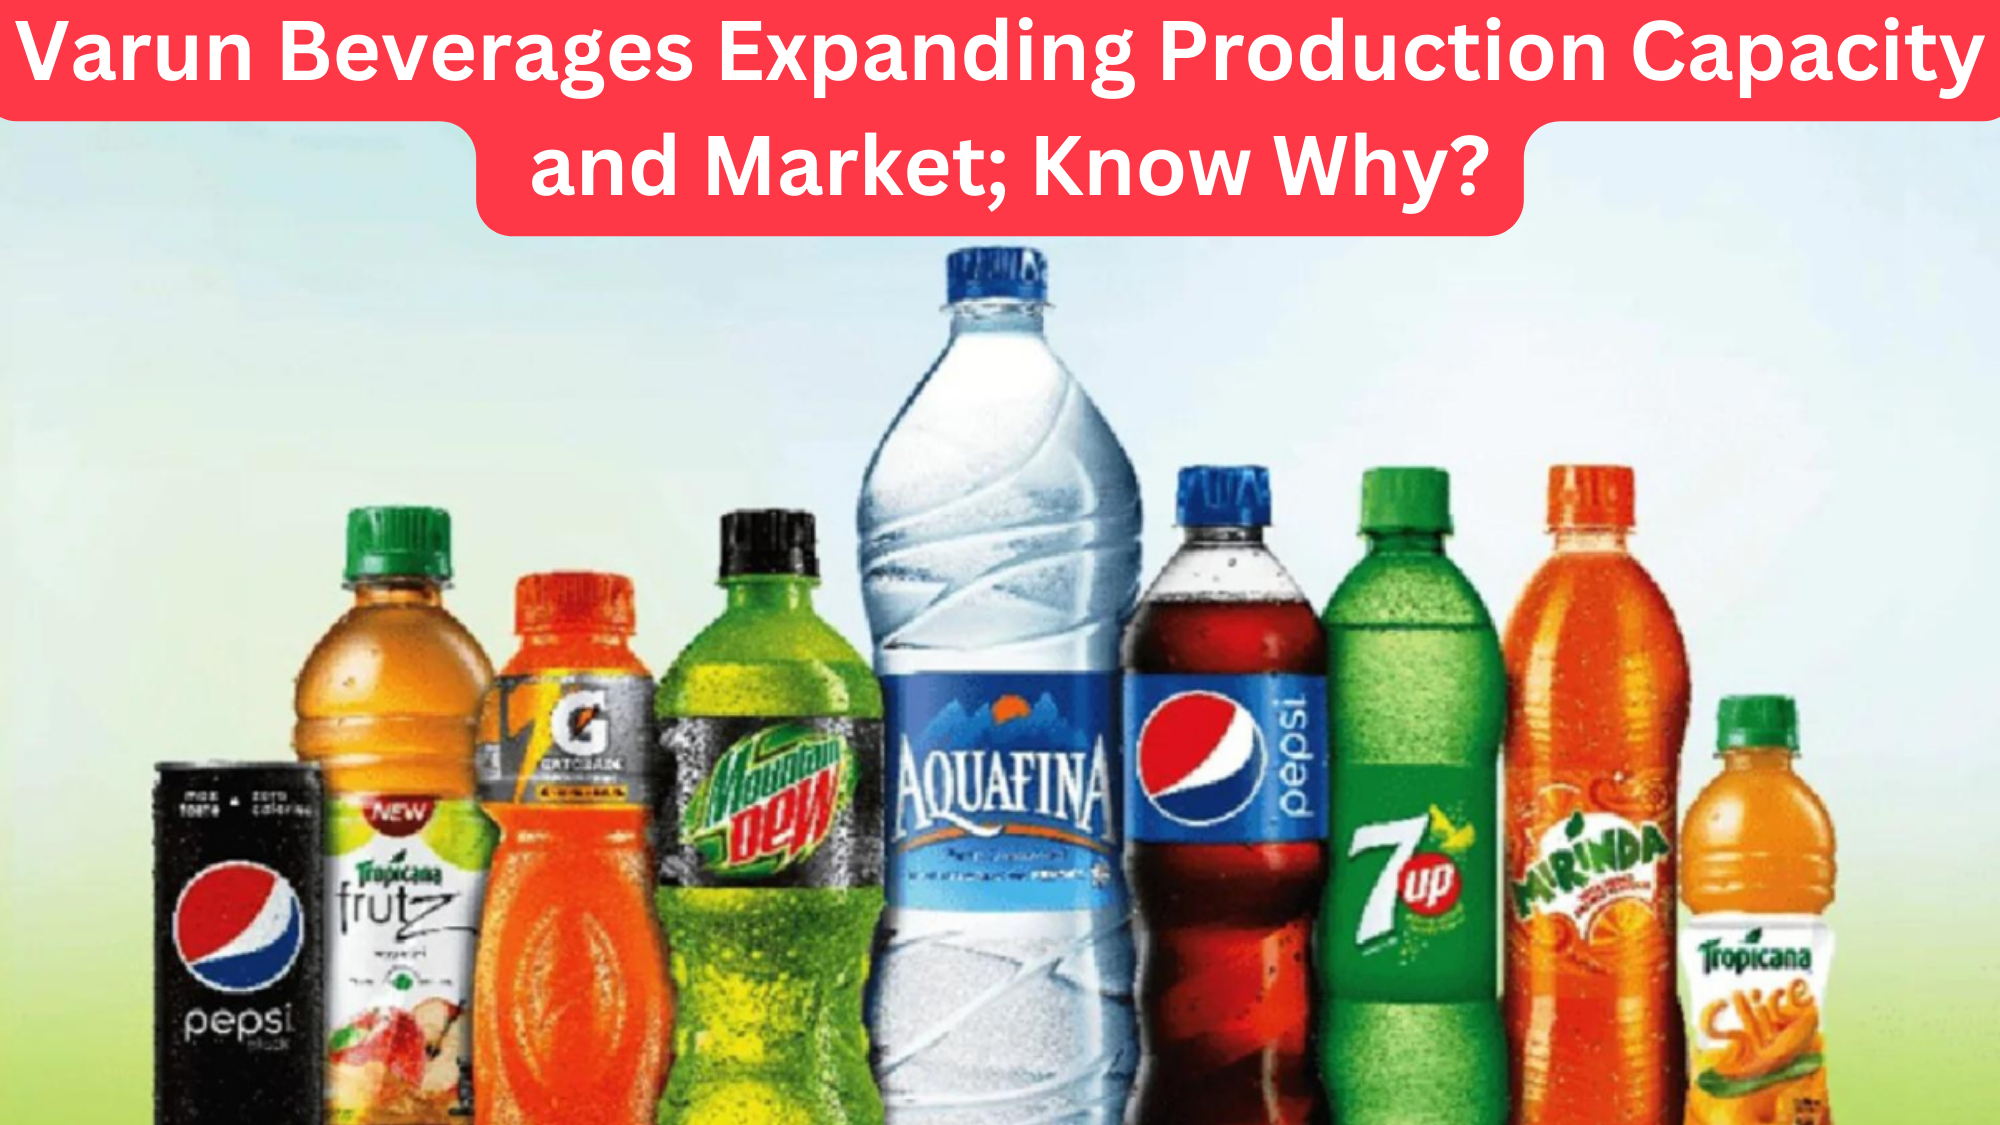 Varun Beverages Expanding Production Capacity and Market; Know Why?